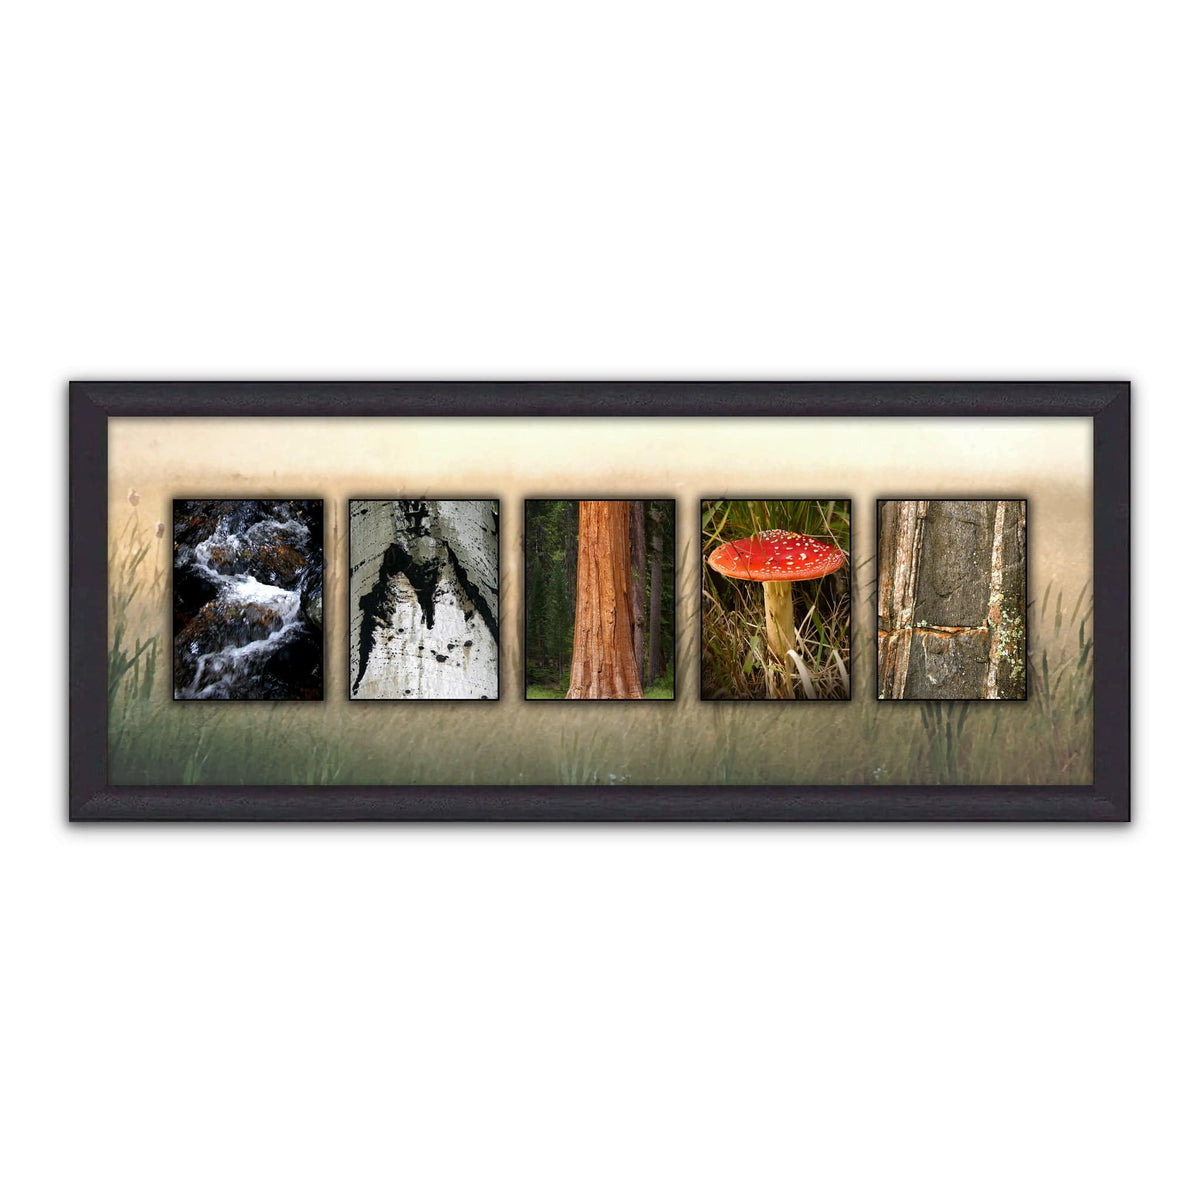 Personalized nature art gift with your name - Framed Art Canvas option shown